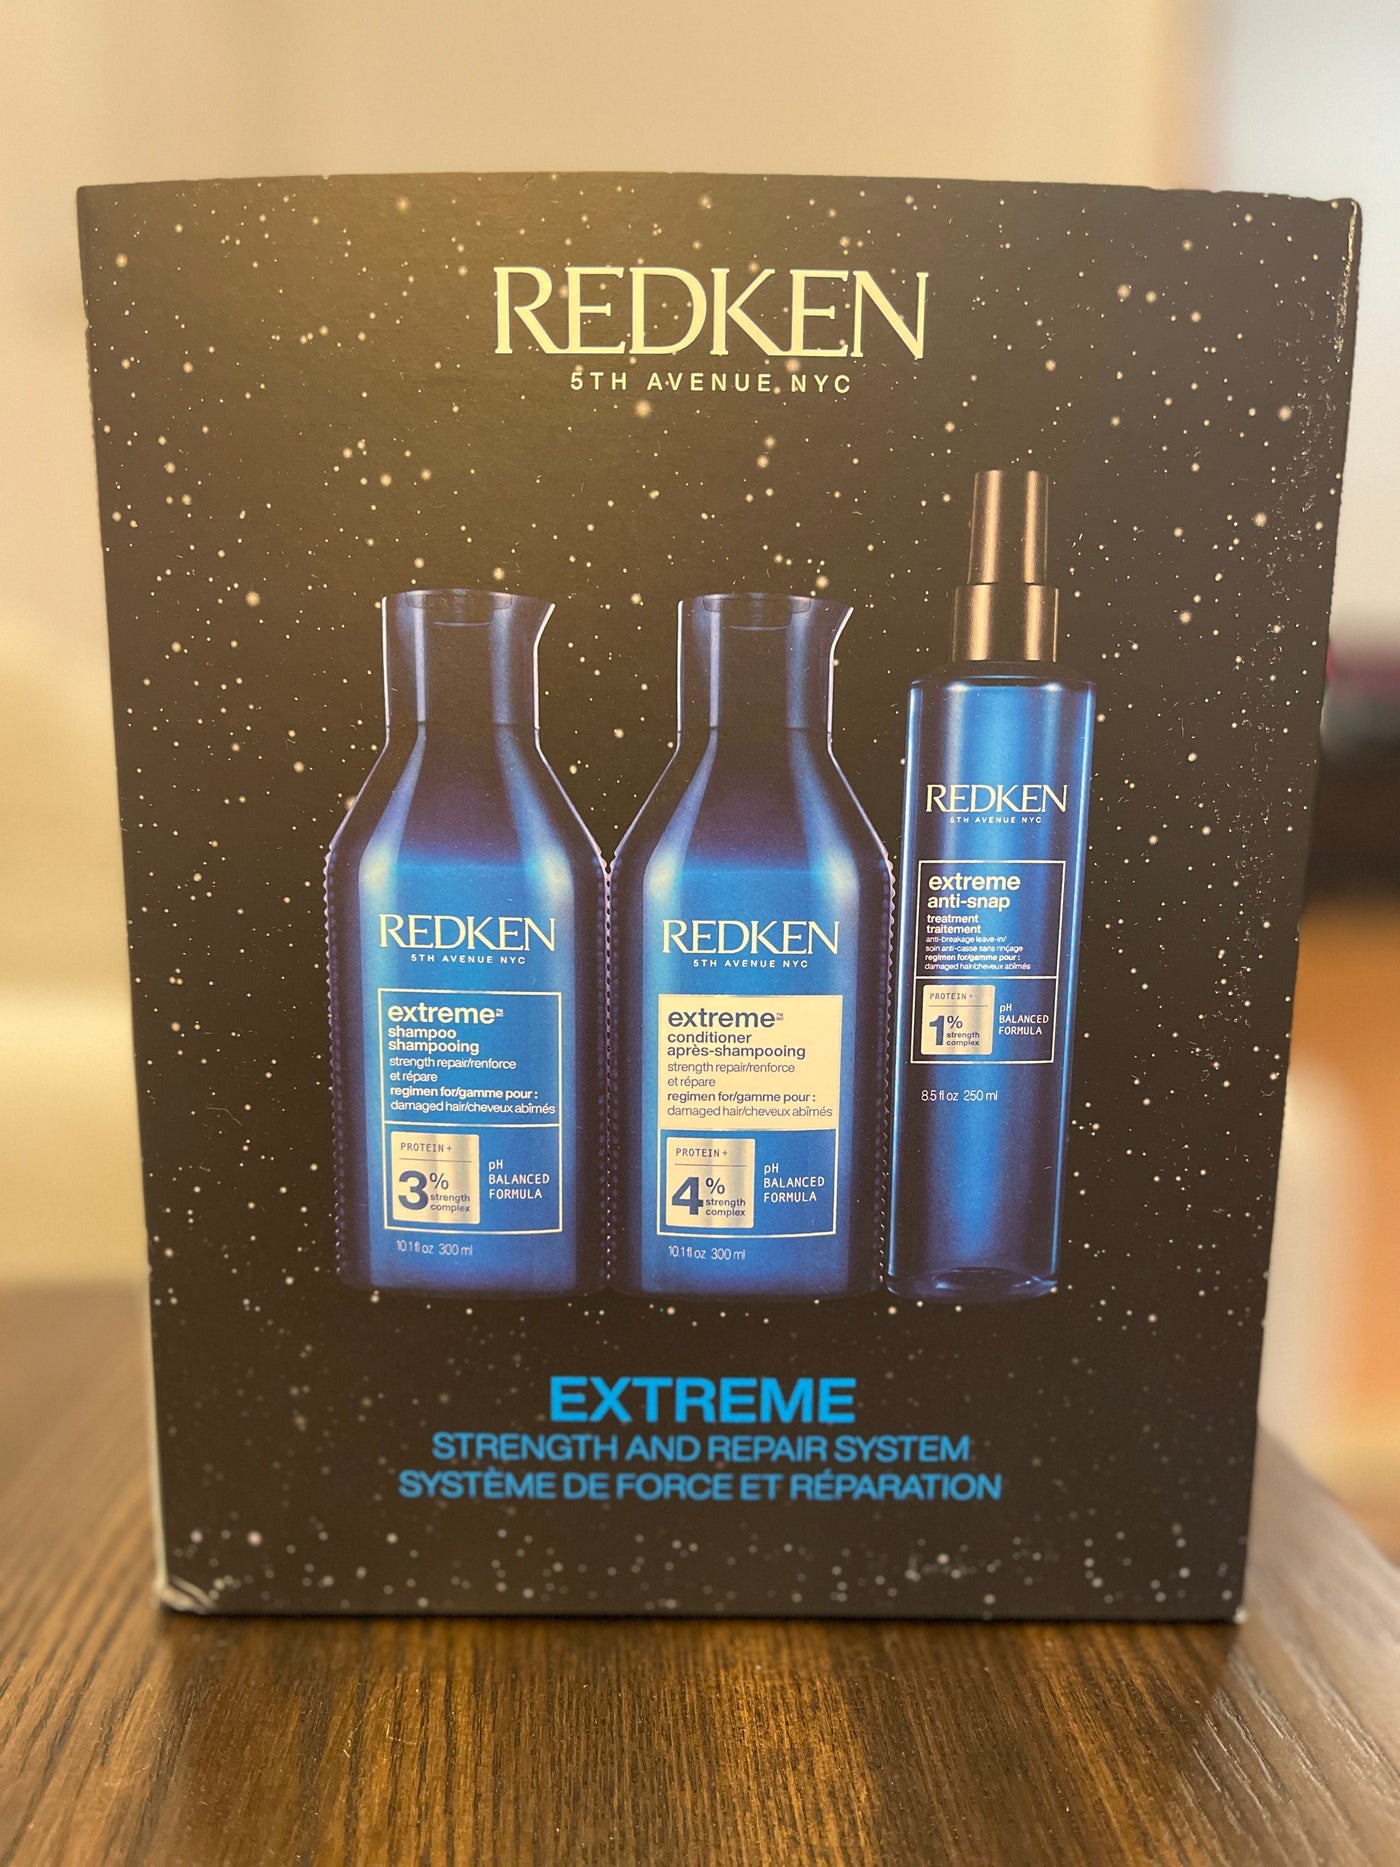 Redken Extreme Strength And Repair System trio kit